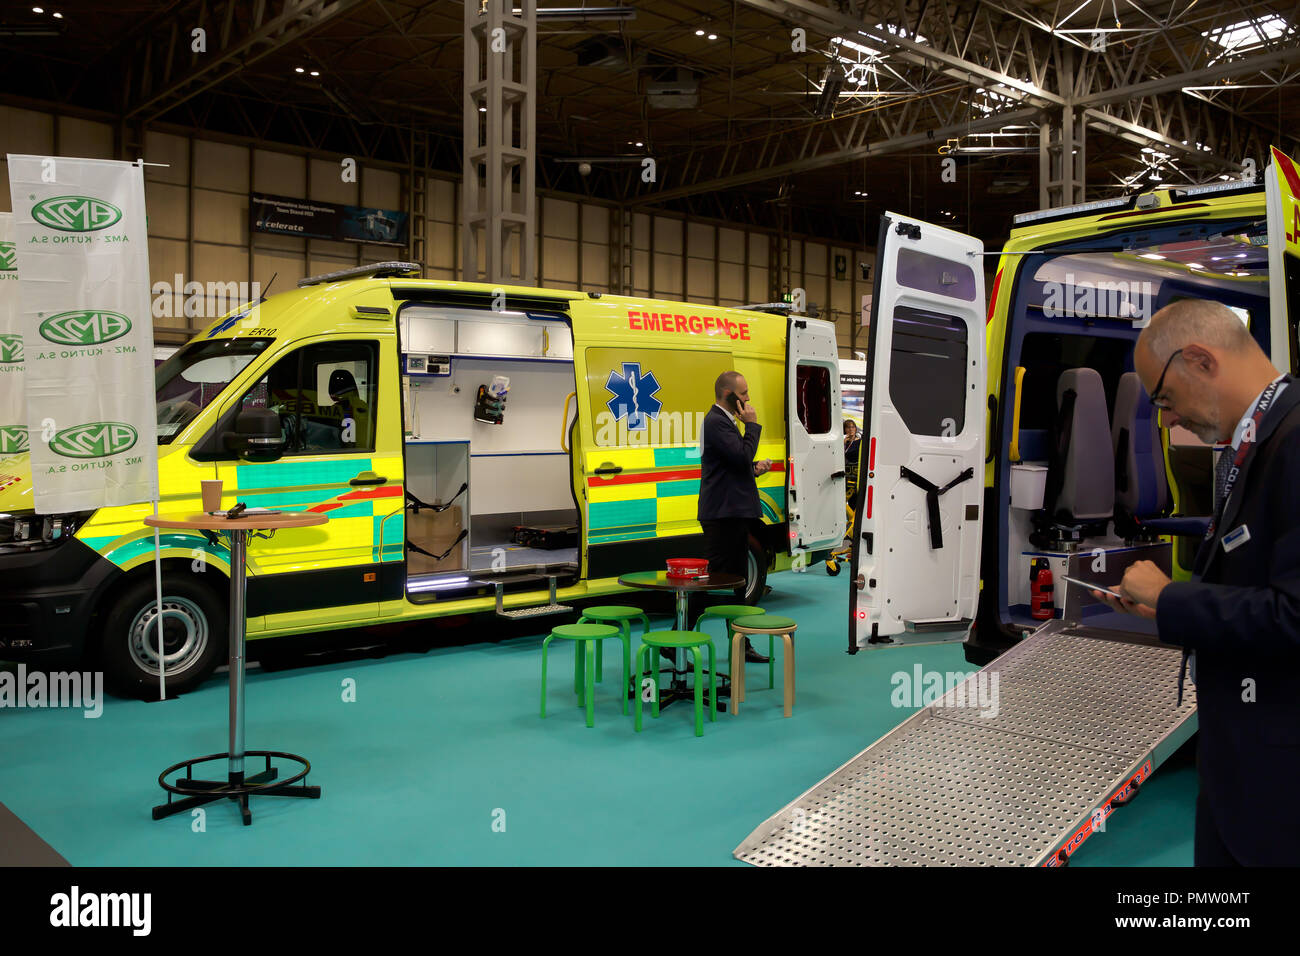 Birmingham,UK,19th September 2018,The Emergency Services Show takes place at the NEC in Birmingham. It runs for 2 days and offers ALL emergency workers a great place to network and learn with over 450 Exhibitors and many service vehicles on display inside and outdoors. There are also many free seminars covering different subjects, all in all a interesting and educational day out. Credit: Keith Larby/Alamy Live News Stock Photo